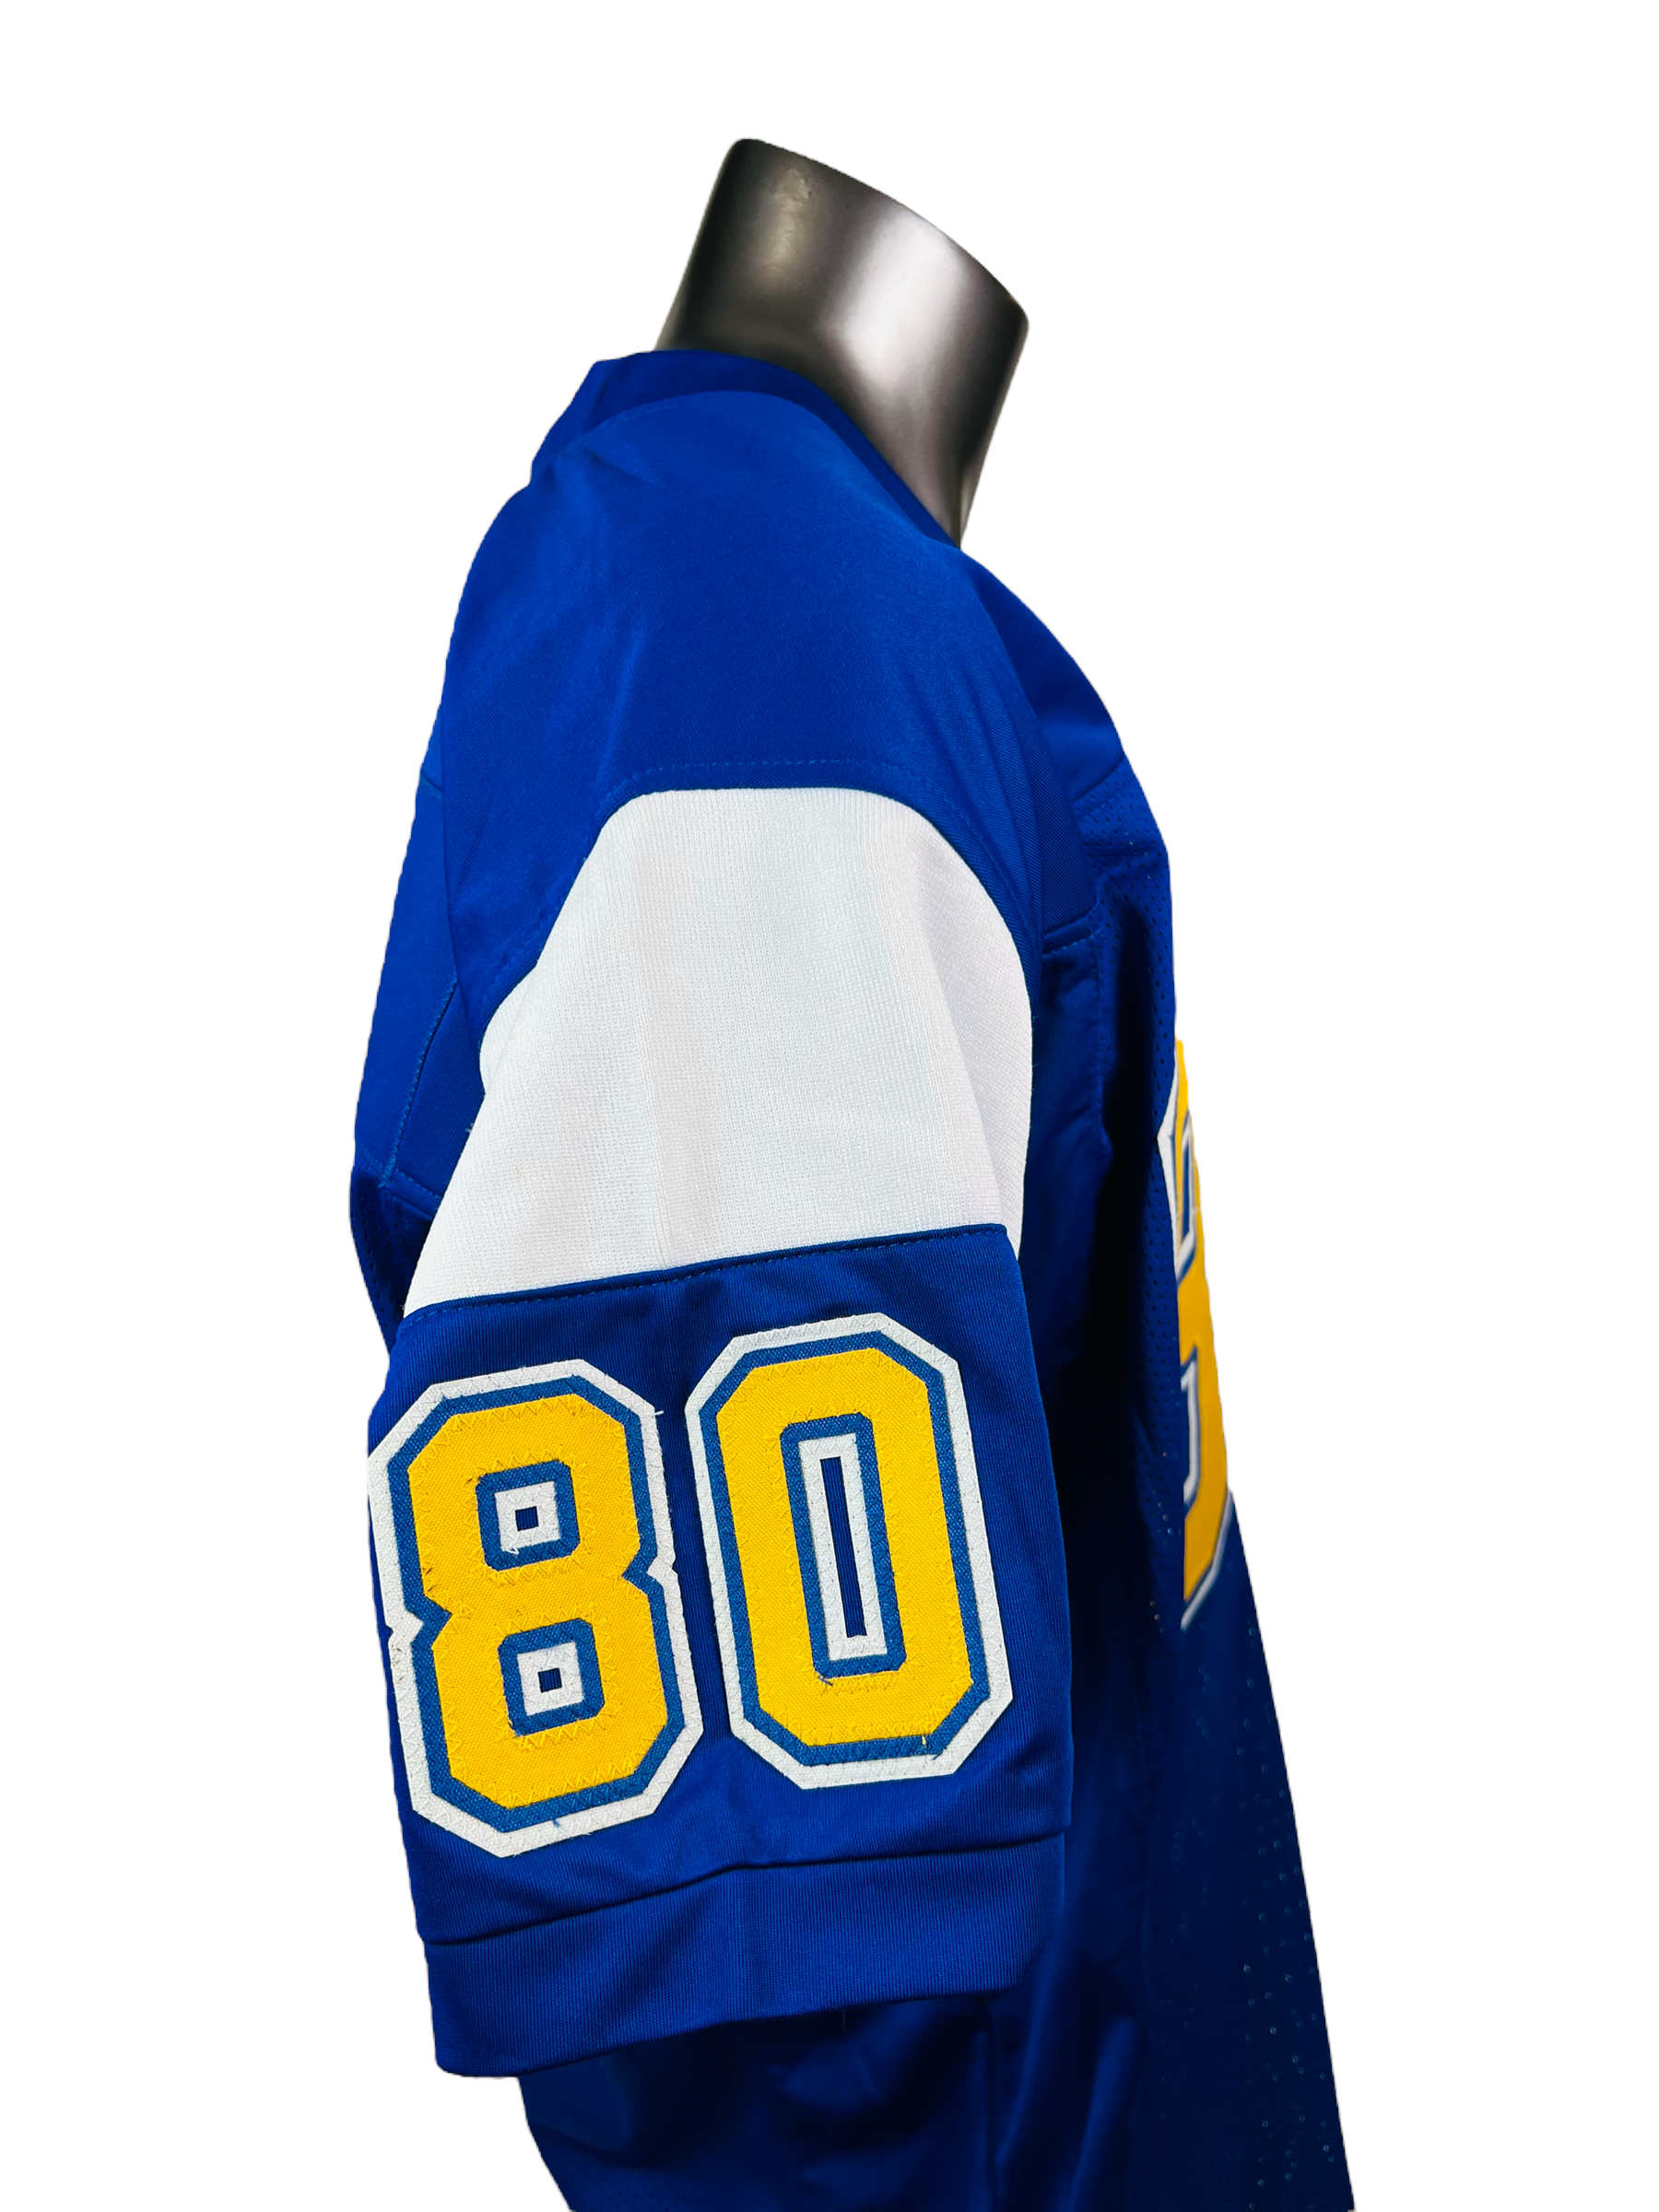 Los Angeles Chargers Throwback Jerseys, Vintage Jersey, Chargers